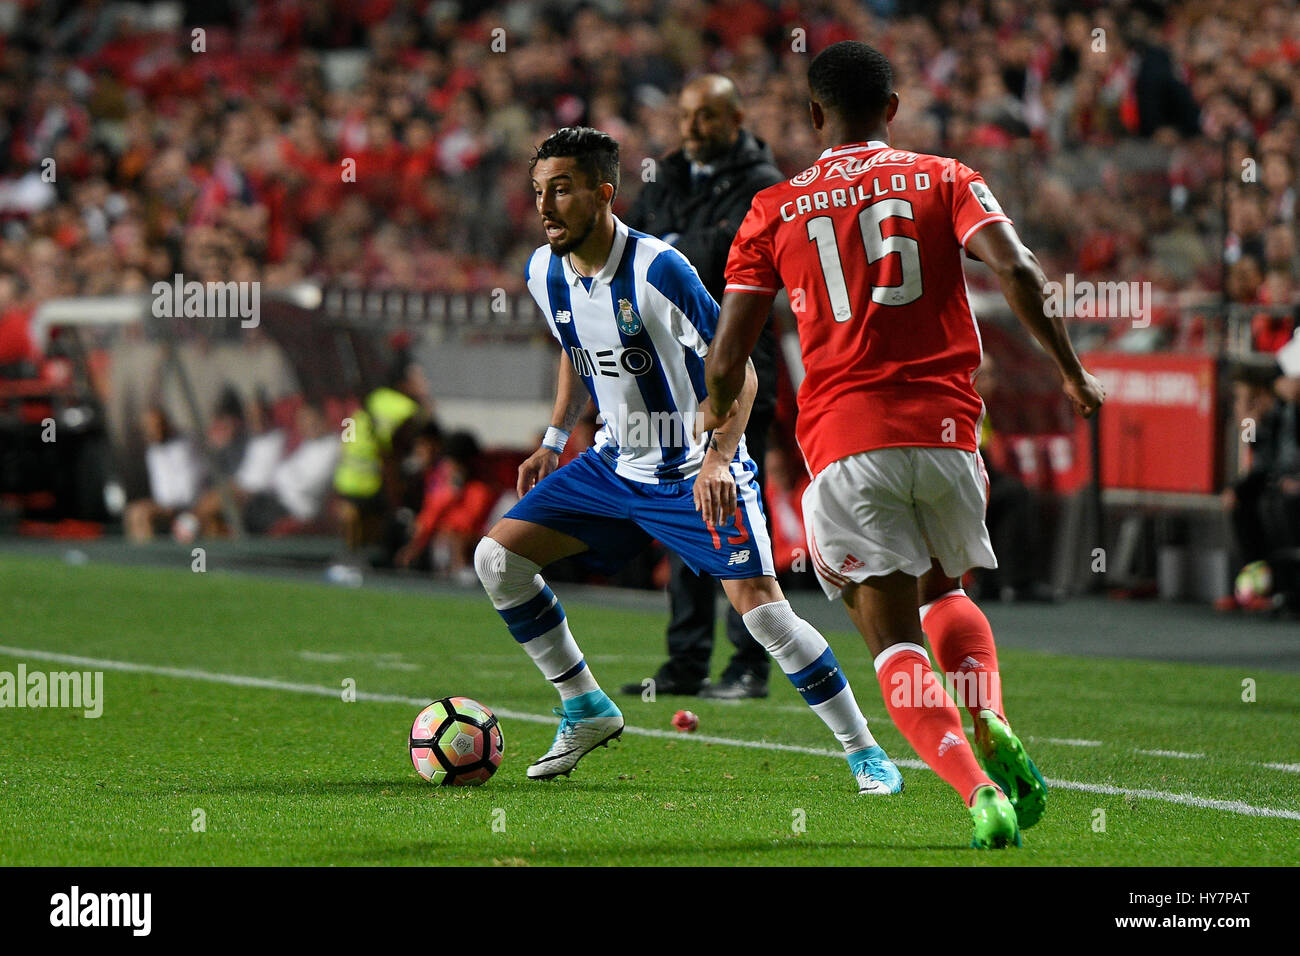 Portugal, Lisbon, April 1, 2017 -  FOOTBALL: PORTUGAL x FC PORTO - Alex Telles #13 PortoÕs defender from Brazil (L) controls the ball while Andre Carrillo #15 BenficaÕs forward from Peru (R) follows during Portuguese First League football match between SL Benfica and FC Porto in Luz Stadium on April 1, 2017 in Lisbon, Portugal. Photo: Bruno de Carvalho / Alamy Stock Photo